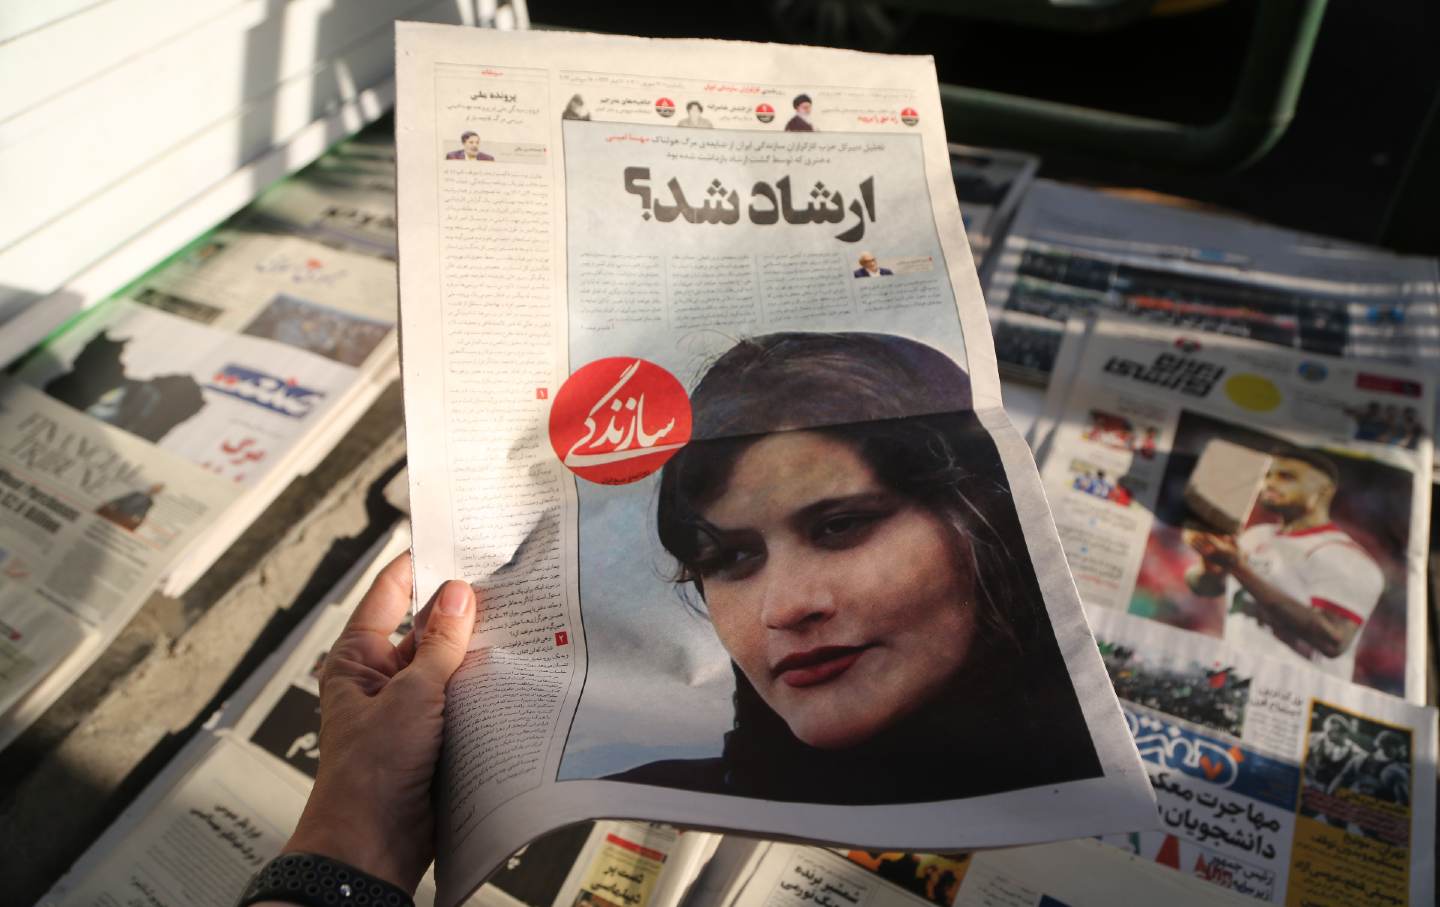 The front page of an Iranian newspaper on the death of Mahsa Amini.